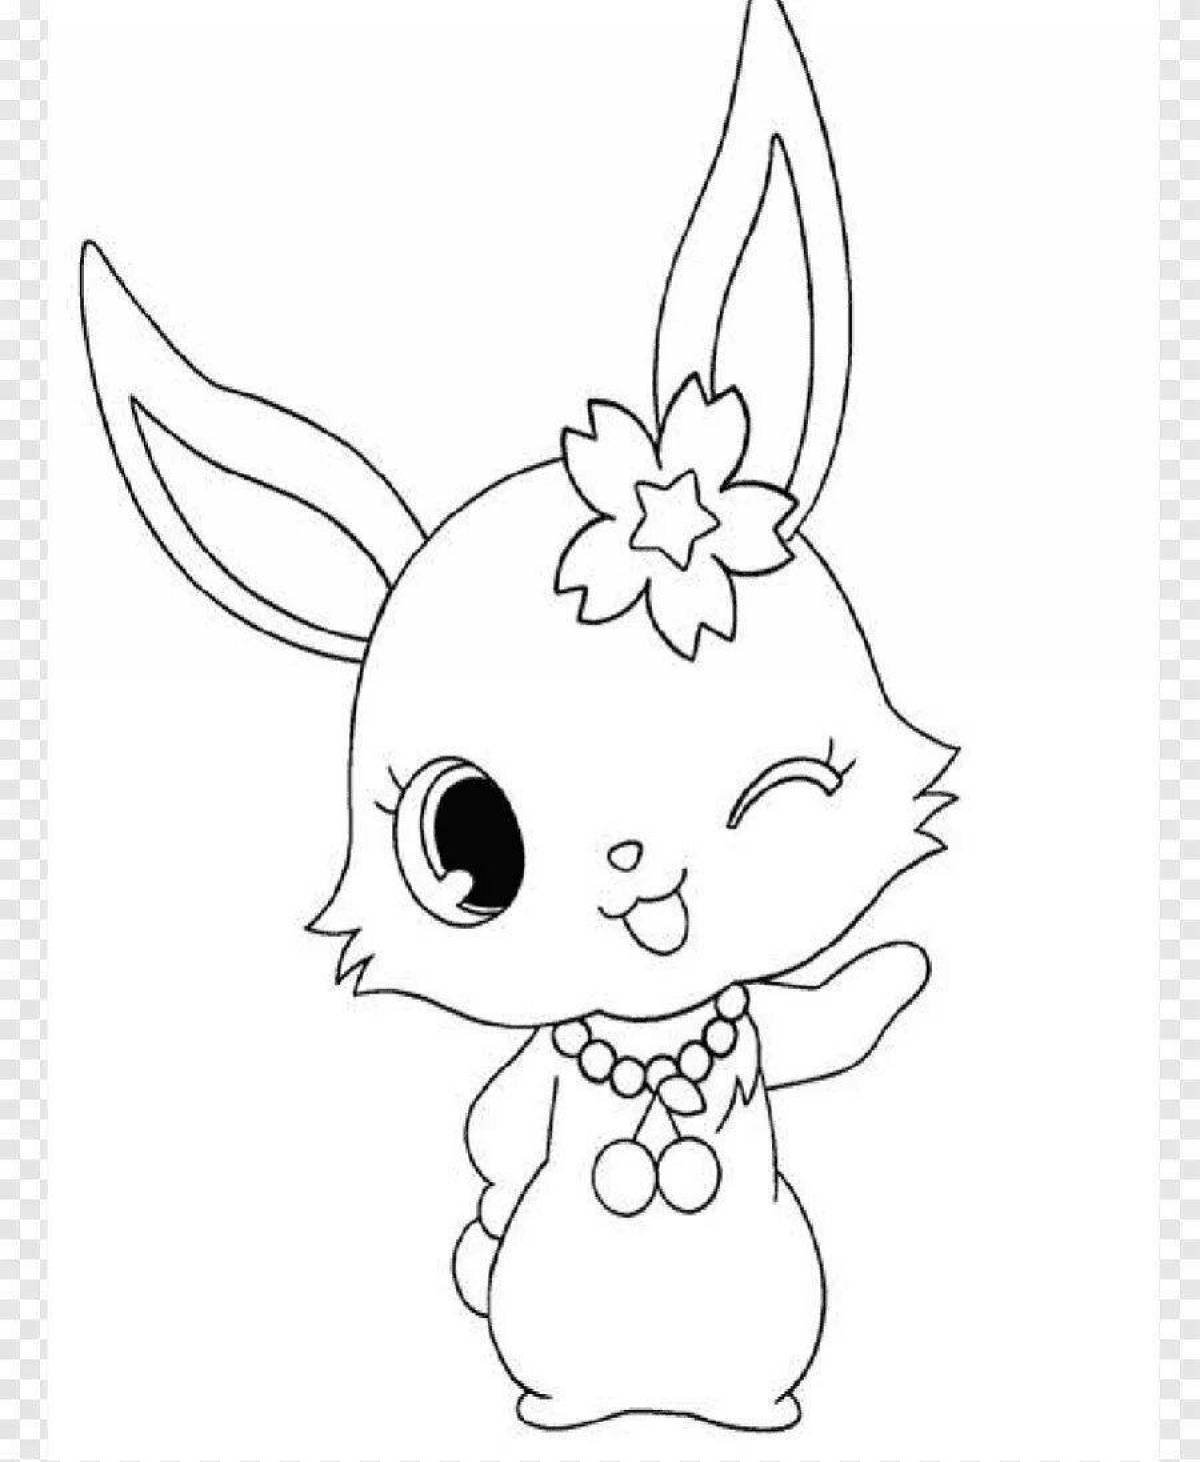 Anime bunny funny coloring book